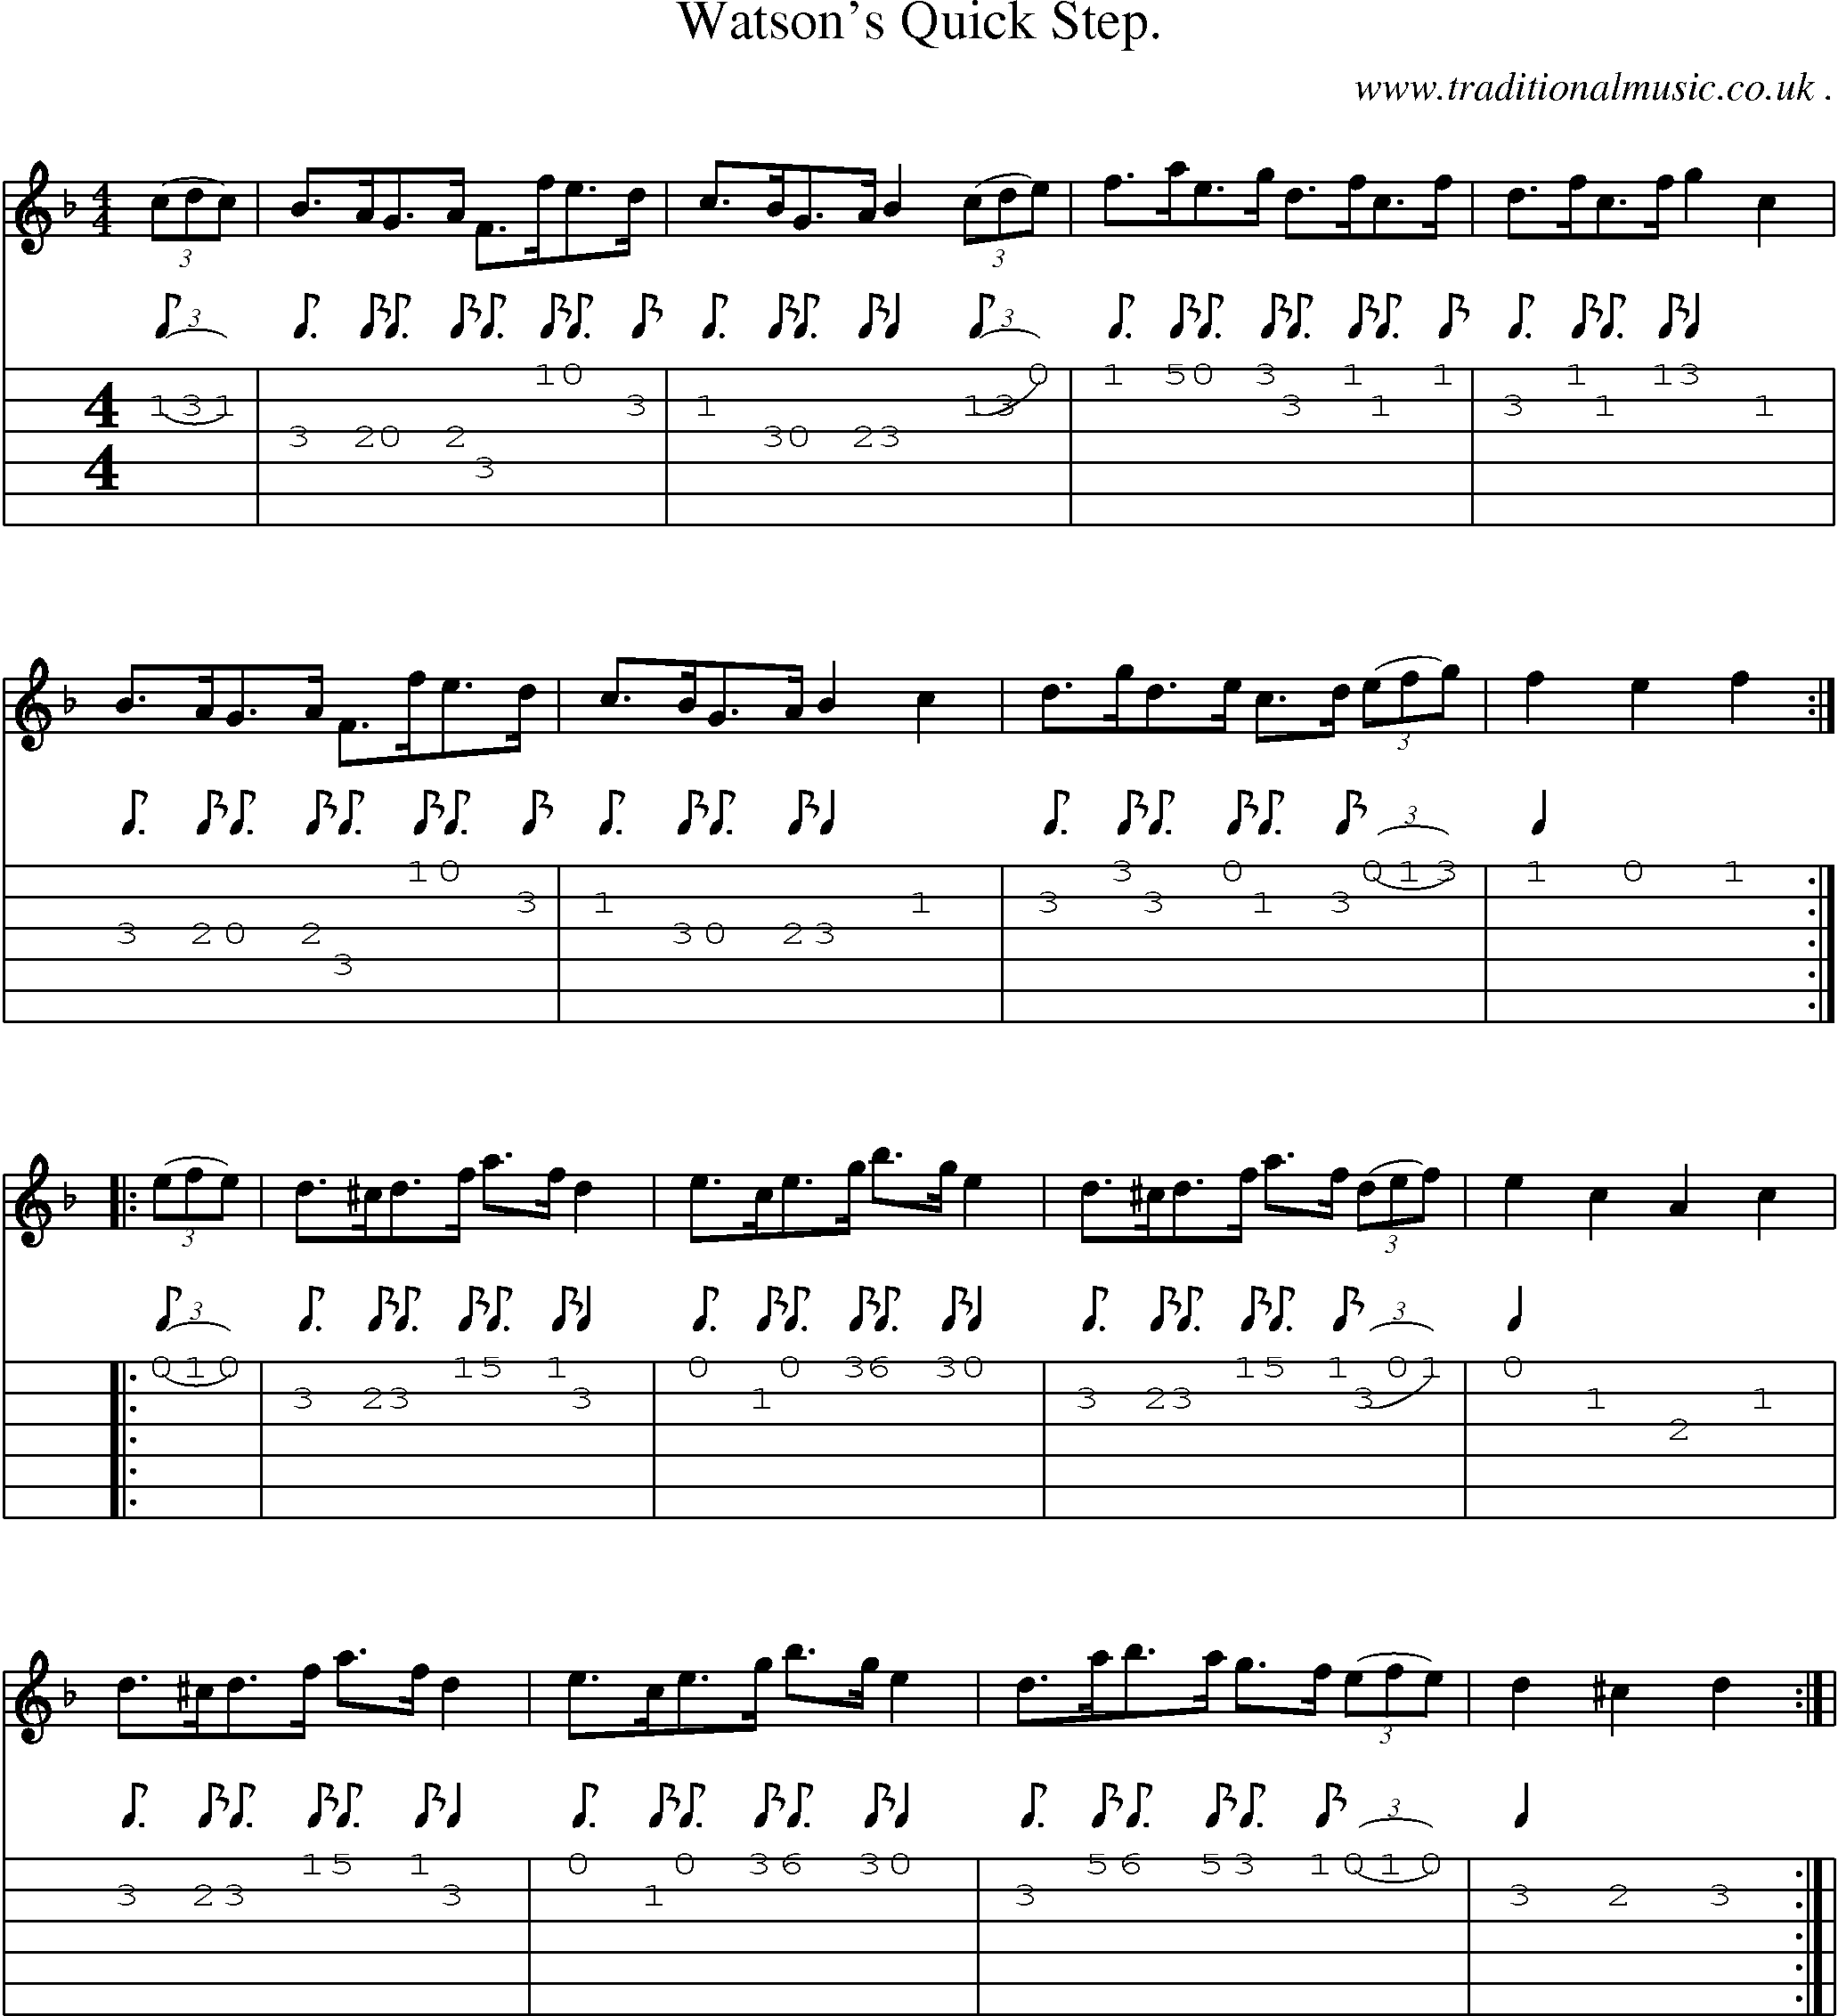 Sheet-Music and Guitar Tabs for Watsons Quick Step